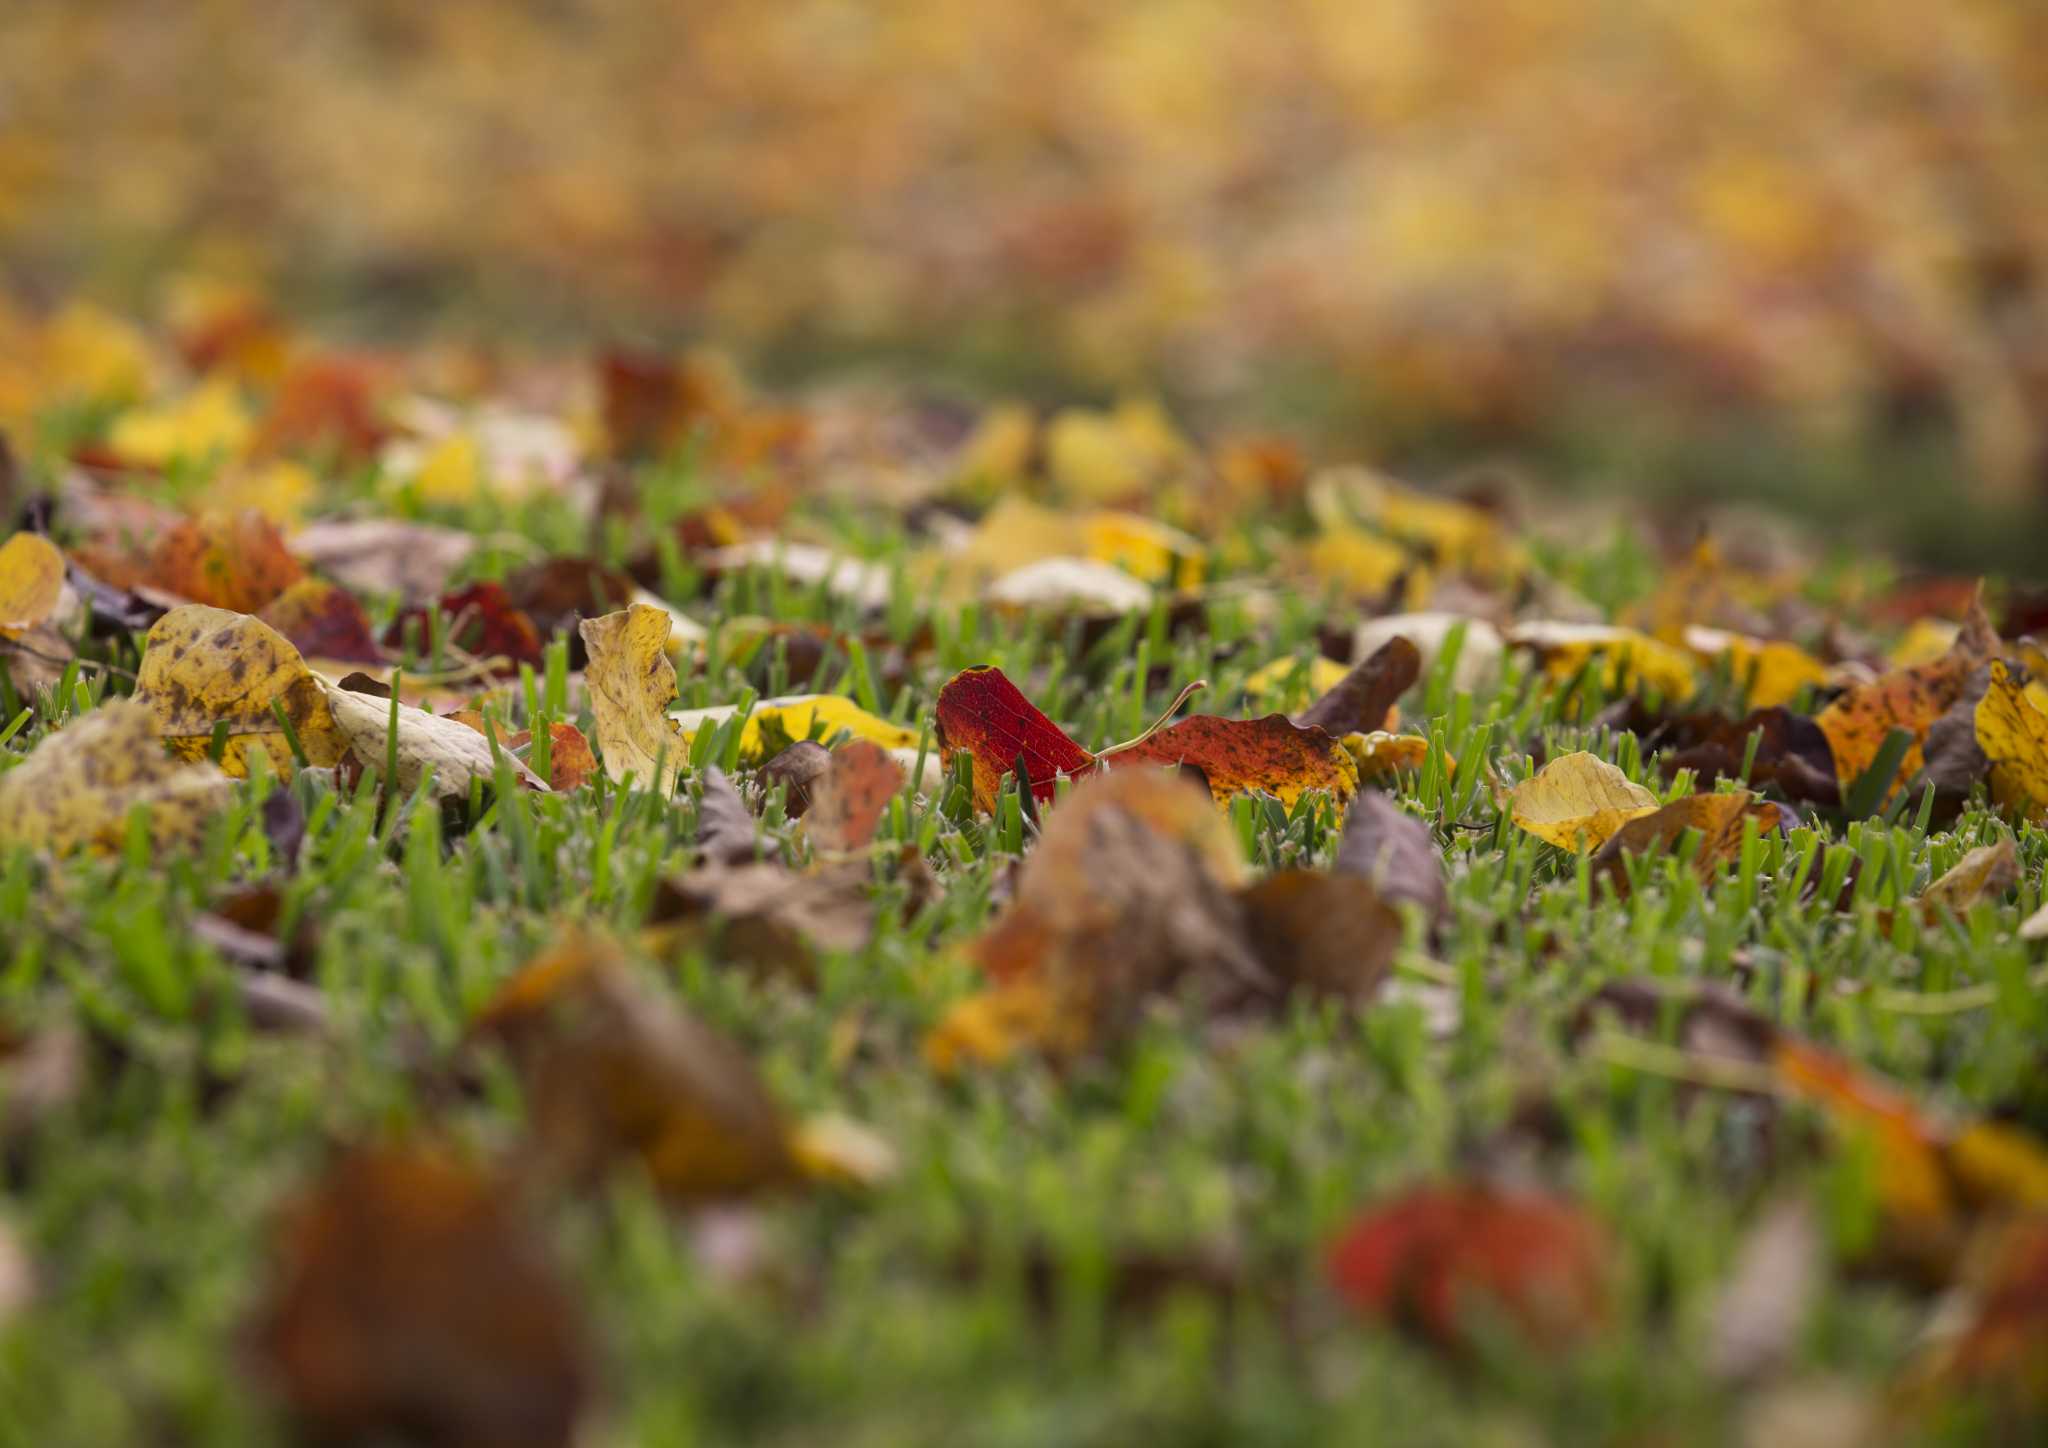 When does fall start? Your autumnal questions, answered